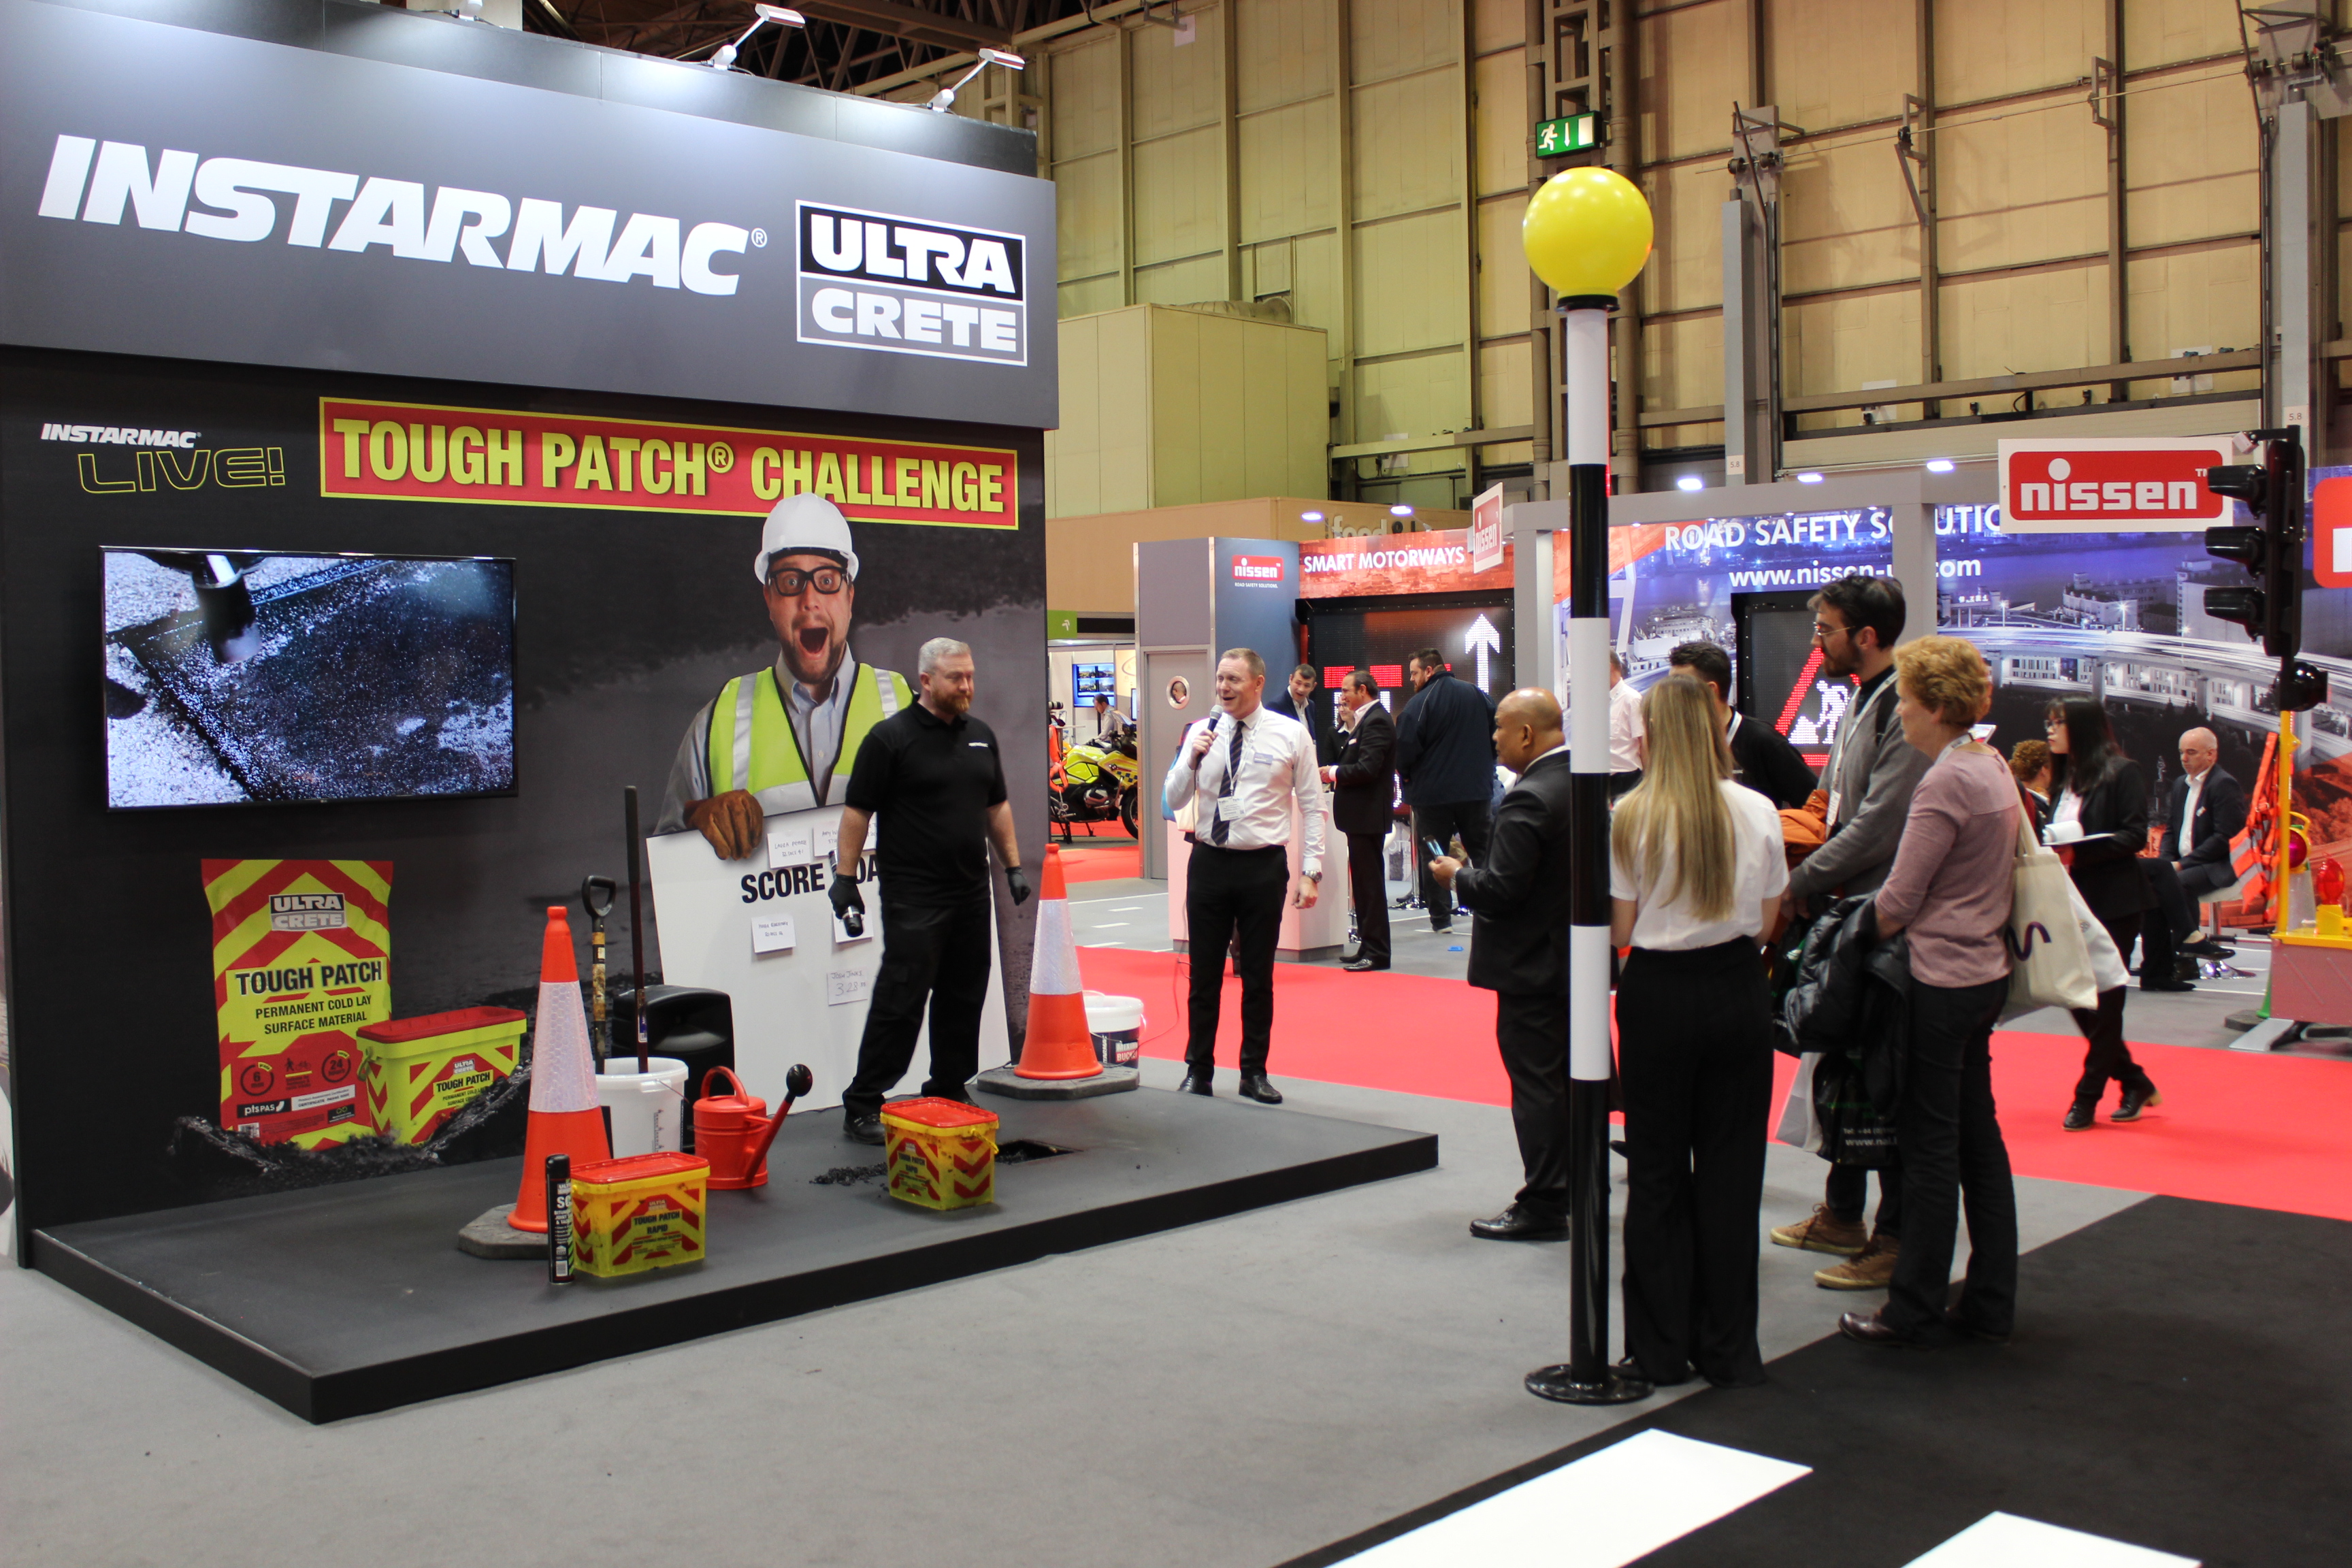 Instarmac impresses with live displays at Traffex image